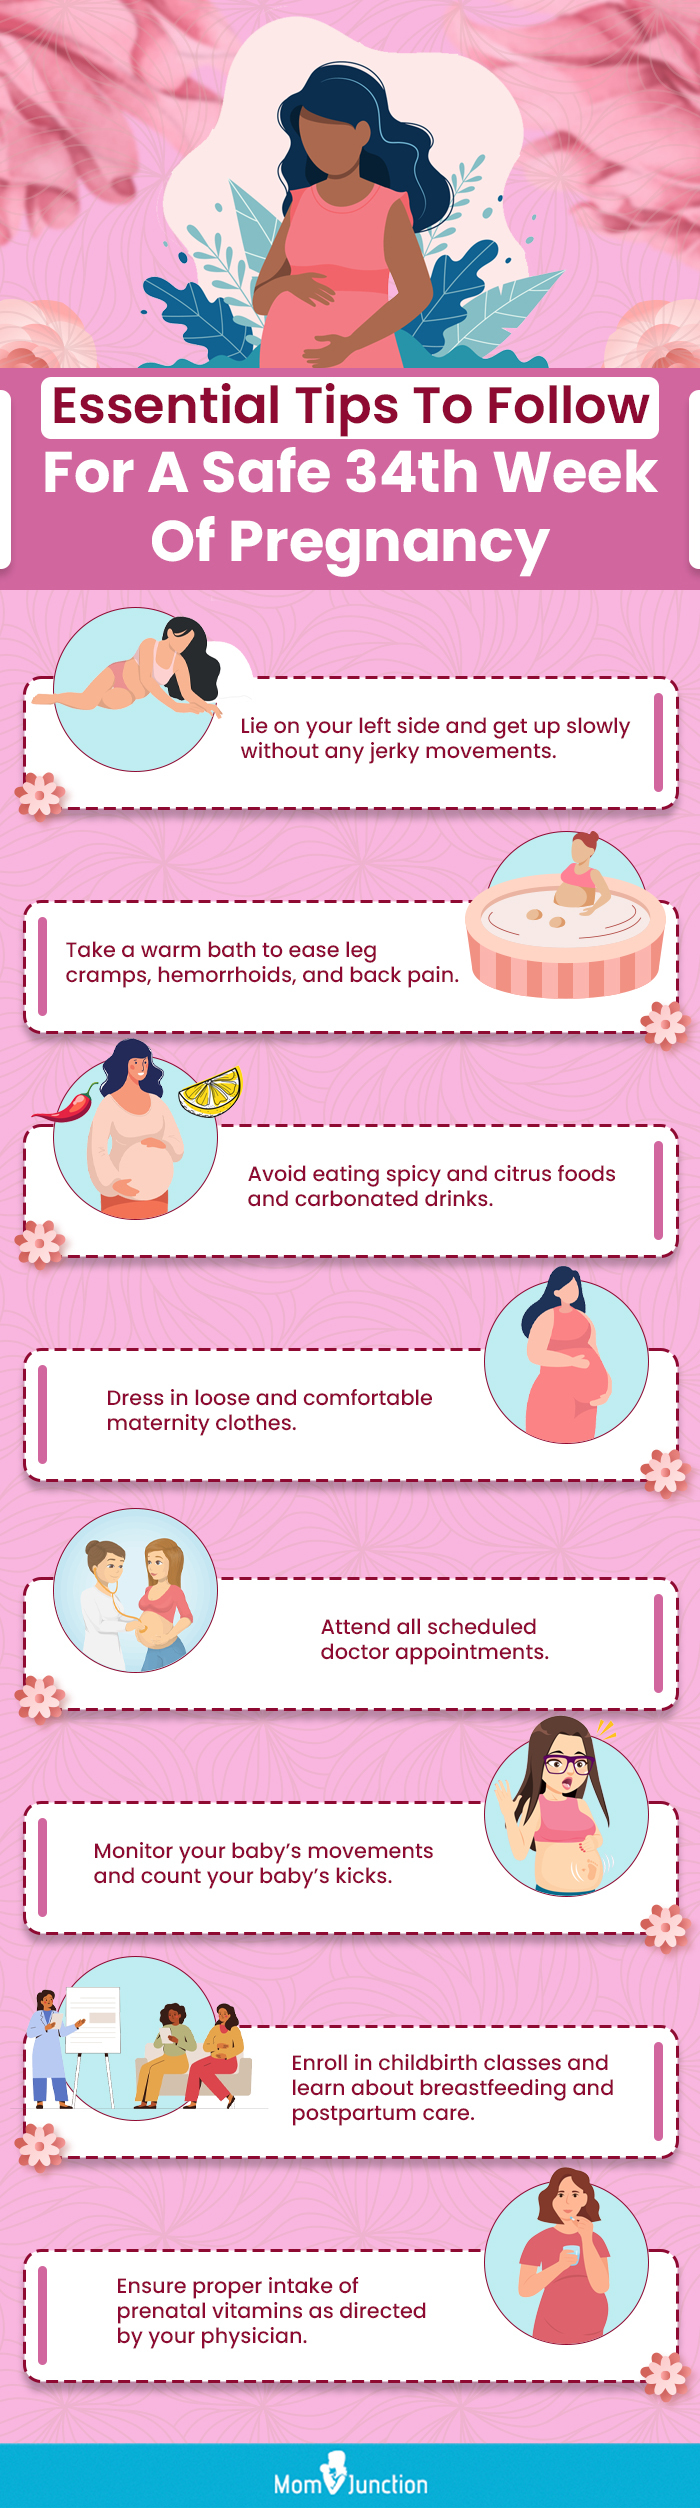 essential tips to follow for a safe 34th week of pregnancy (infographic)